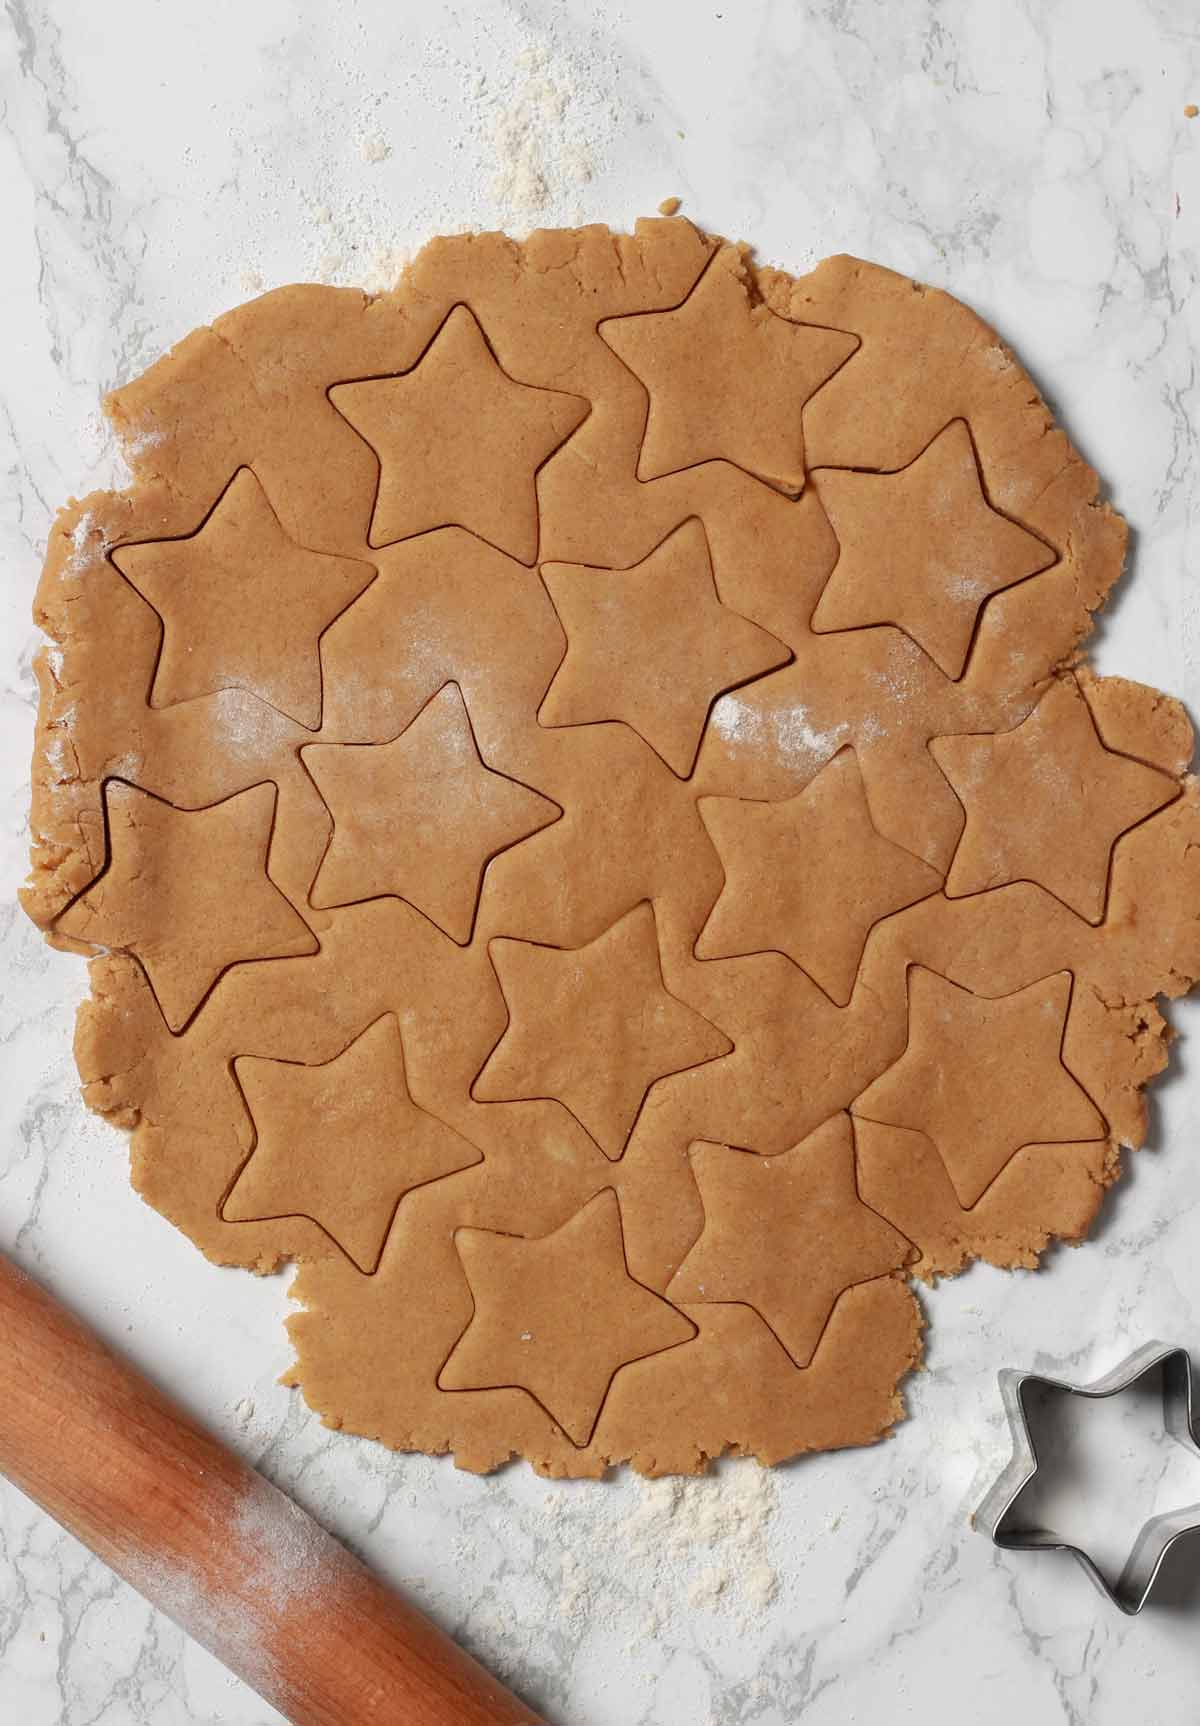 Dough Rolled On Surface With Star Shapes Cut Out